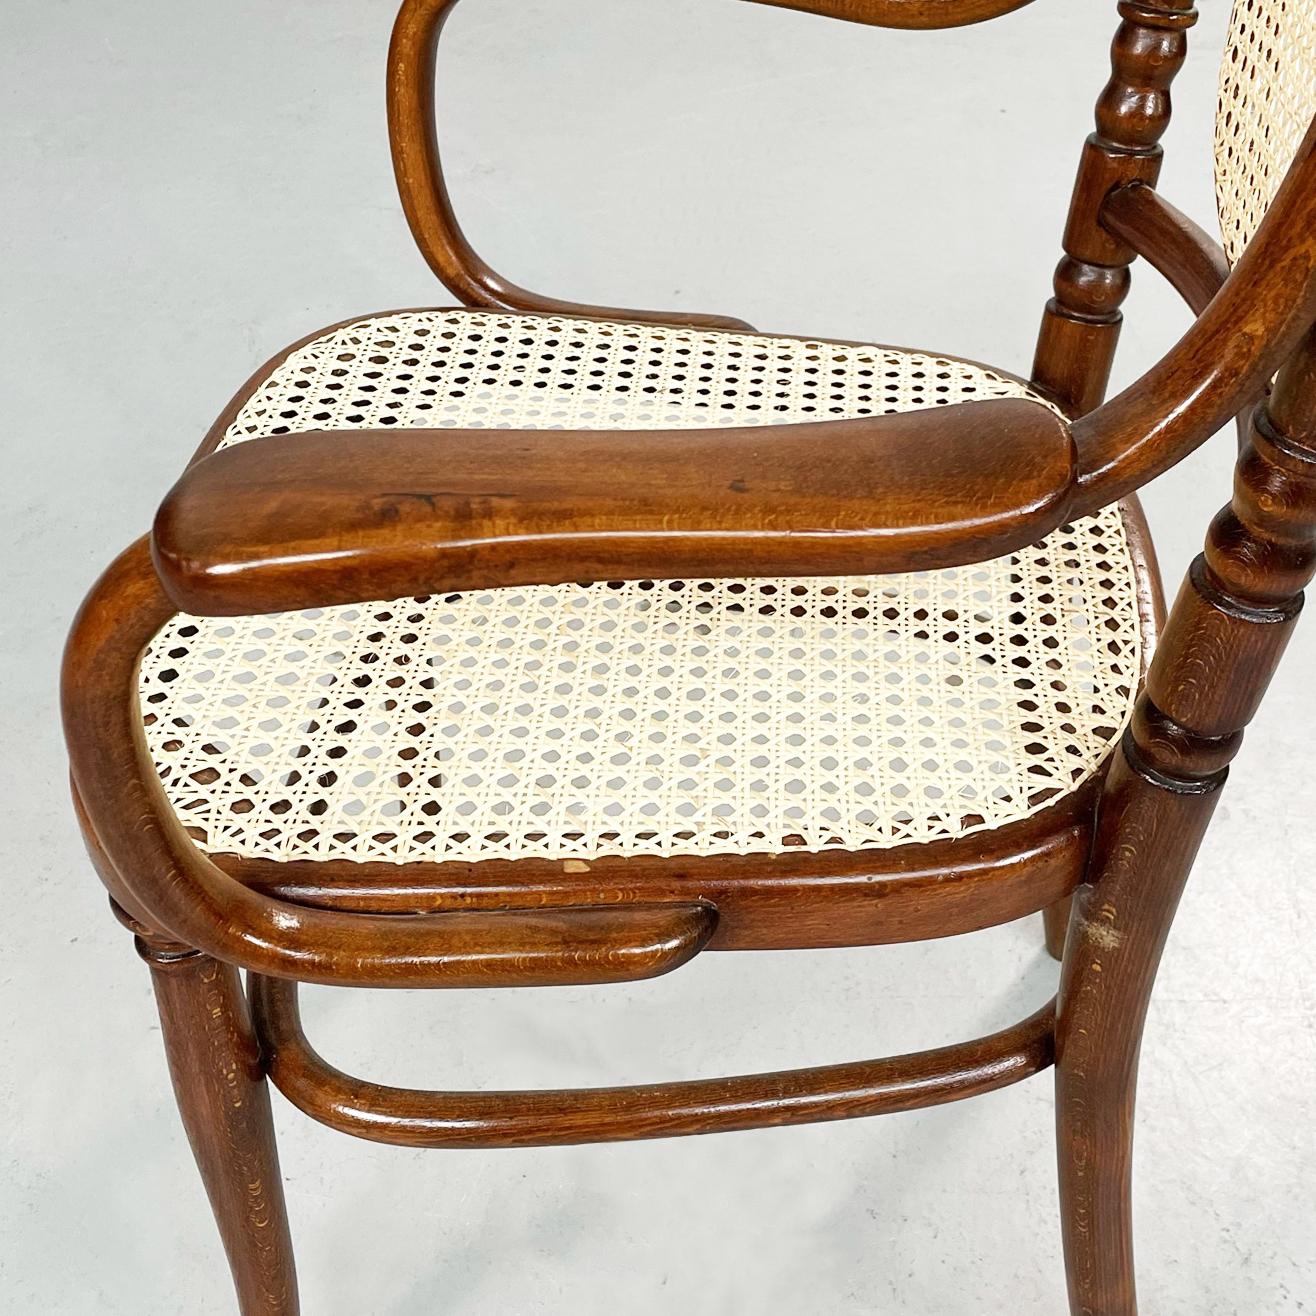 Austrian Chairs with Straw and Wood by Thonet, 1900s For Sale 6